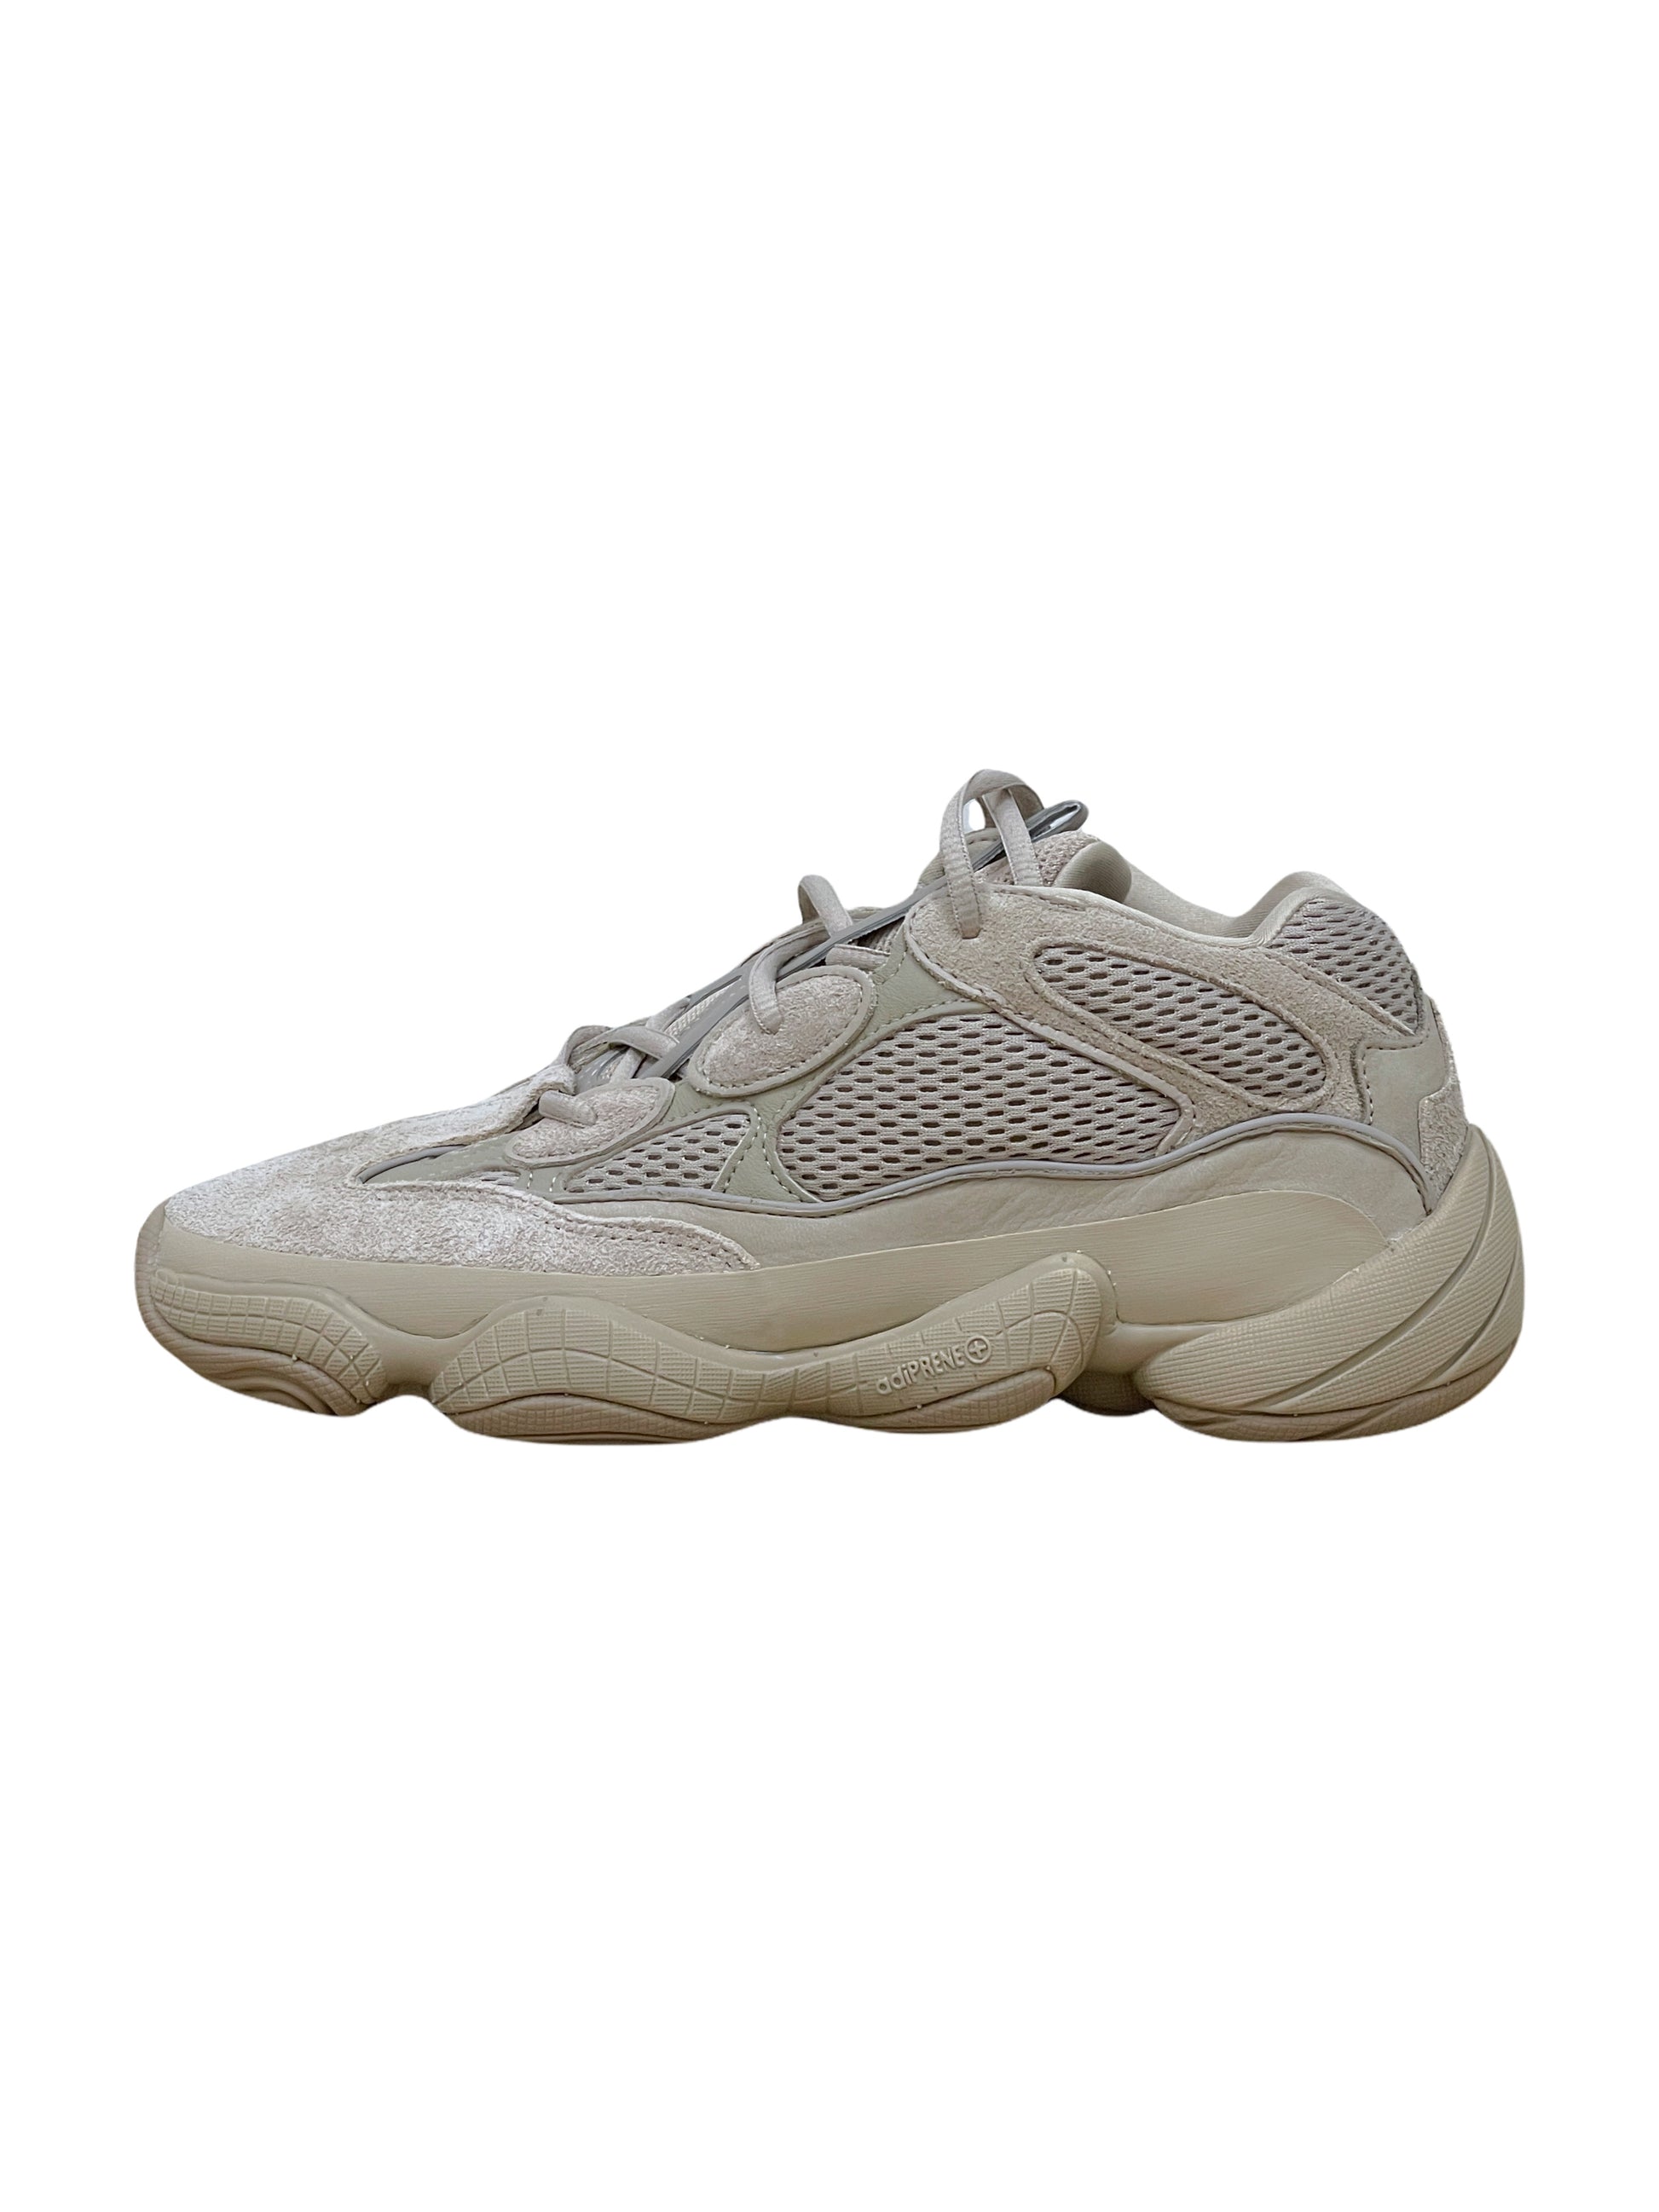 Adidas Yeezy 500 Taupe Light Sneakers —Genuine Design luxury consignment Calgary, Alberta, New & pre-owned clothing, shoes, accessories.